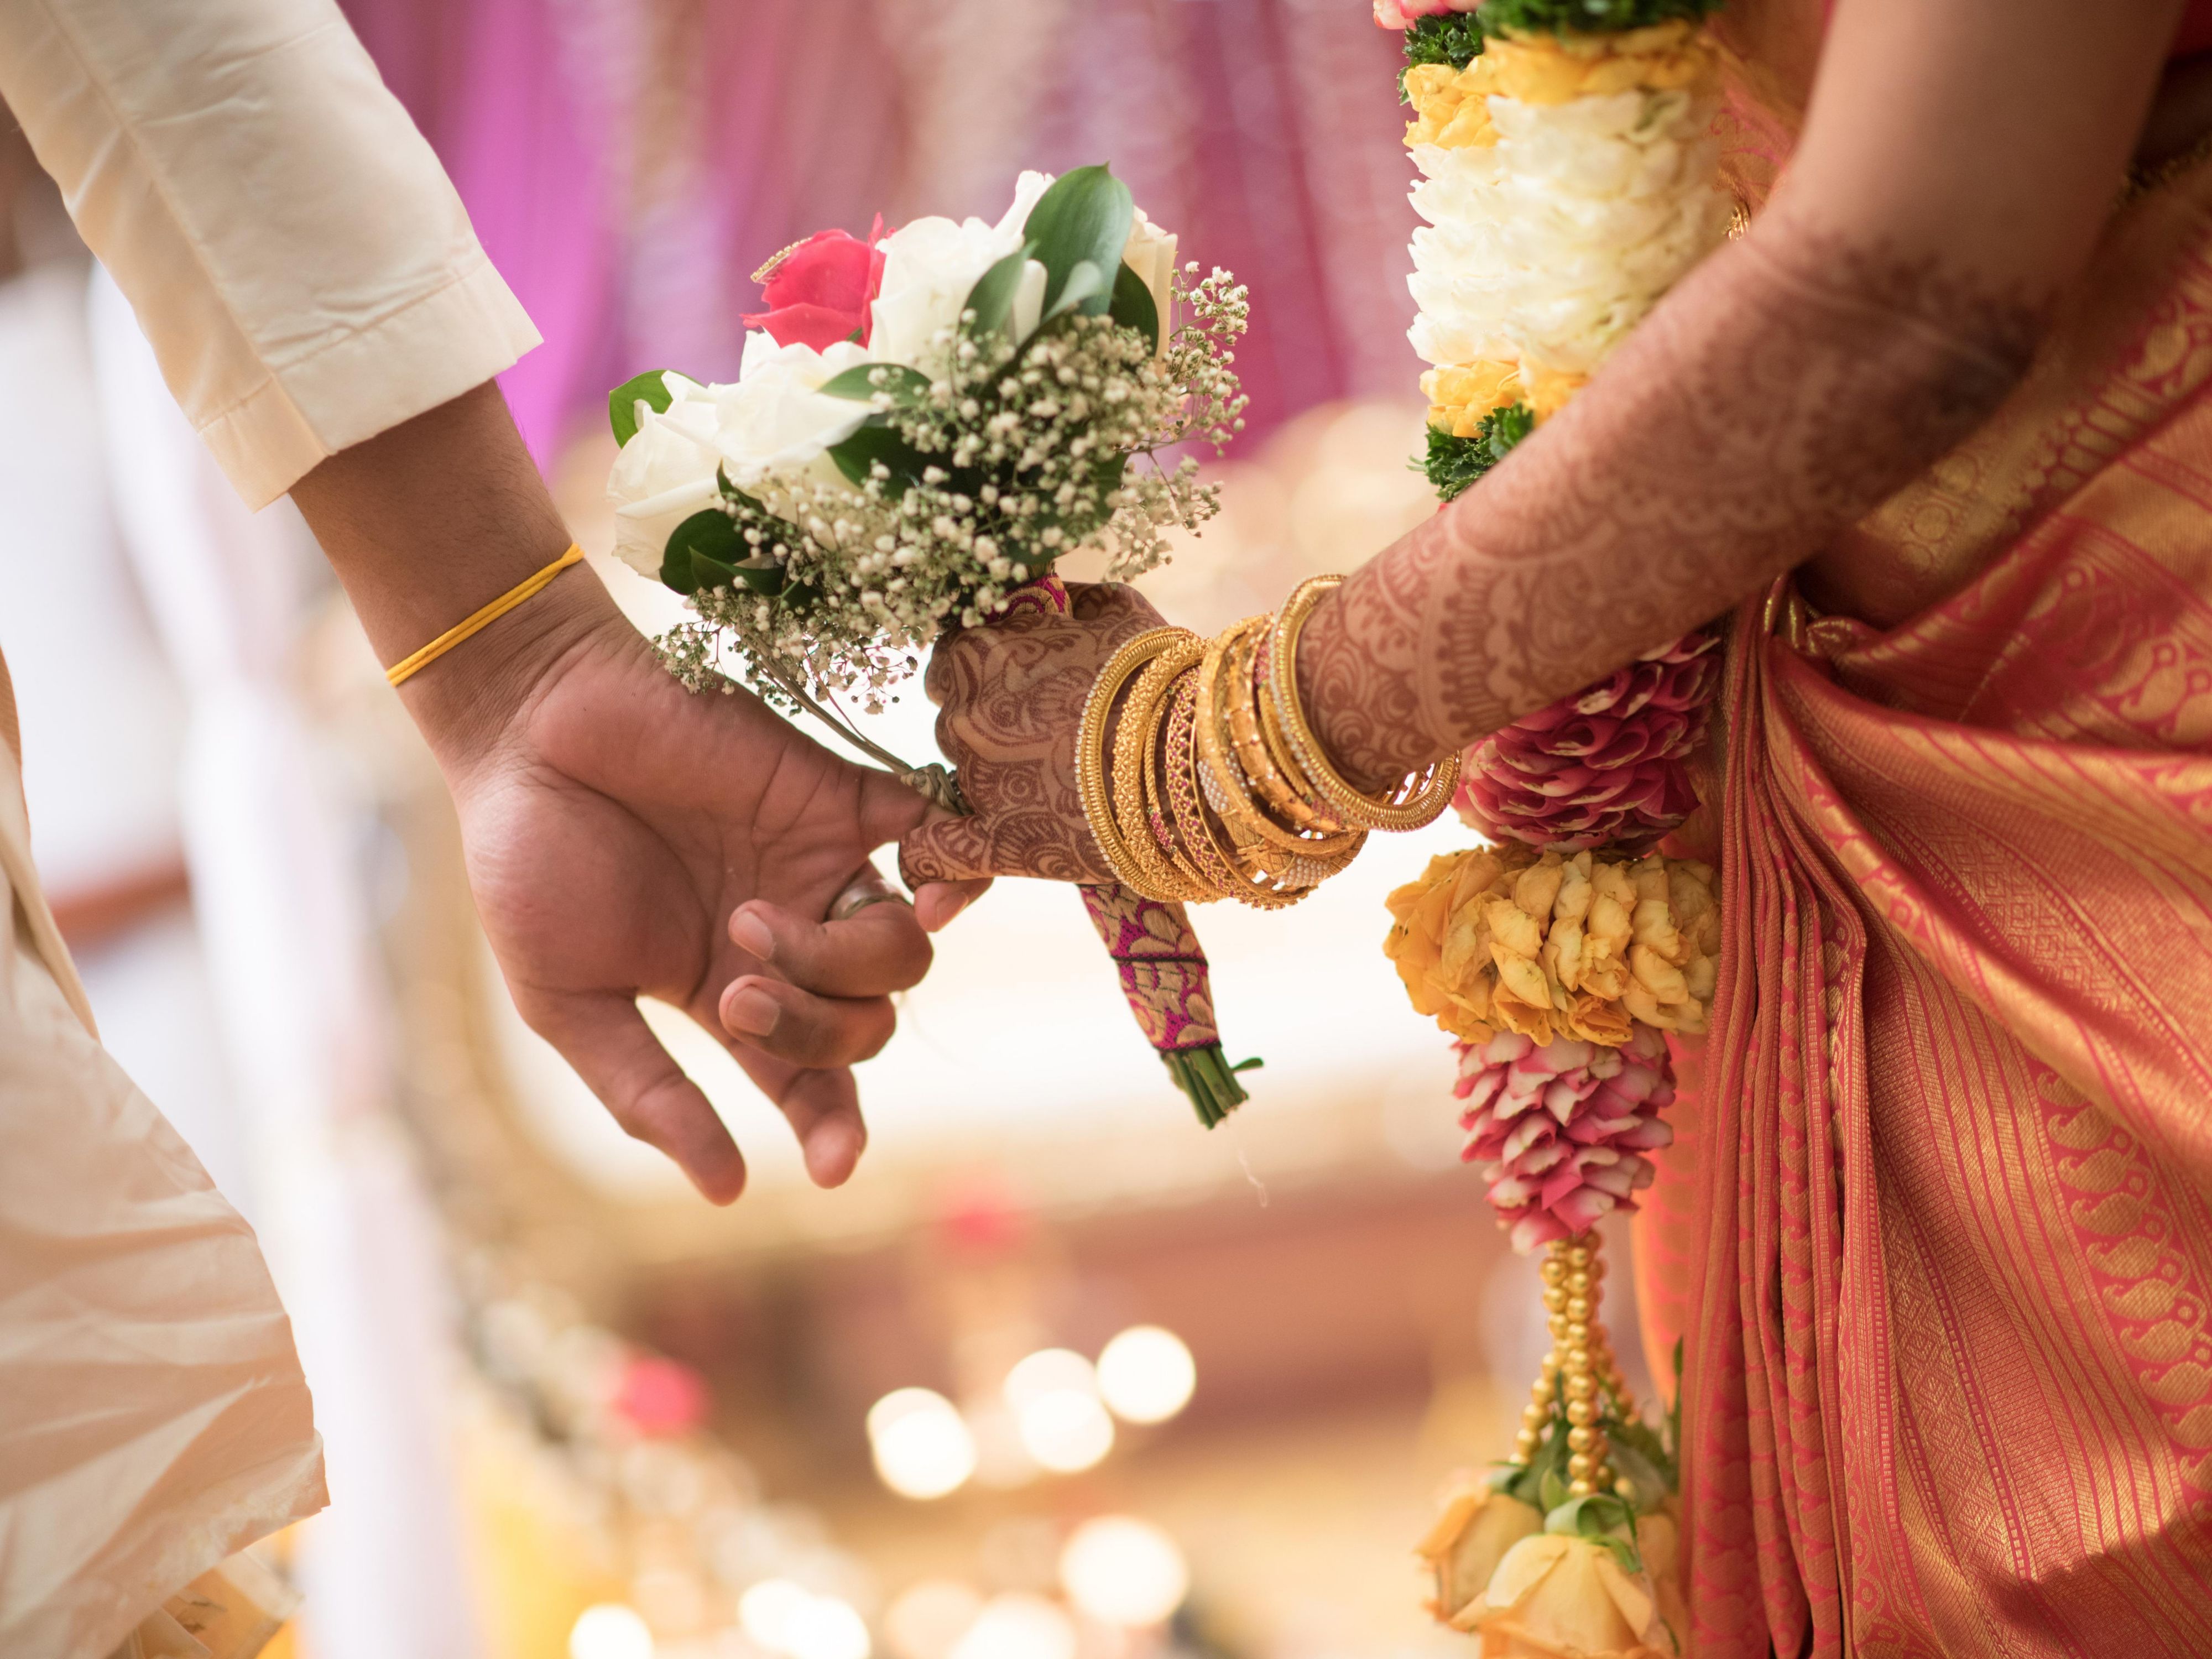 Let every moment of your special day be filled with awe as you create cherishable memories for a lifetime. Our team of wedding experts are all set to craft your dream wedding into a beautiful realization. So come and create your “Happily After” with perfection.